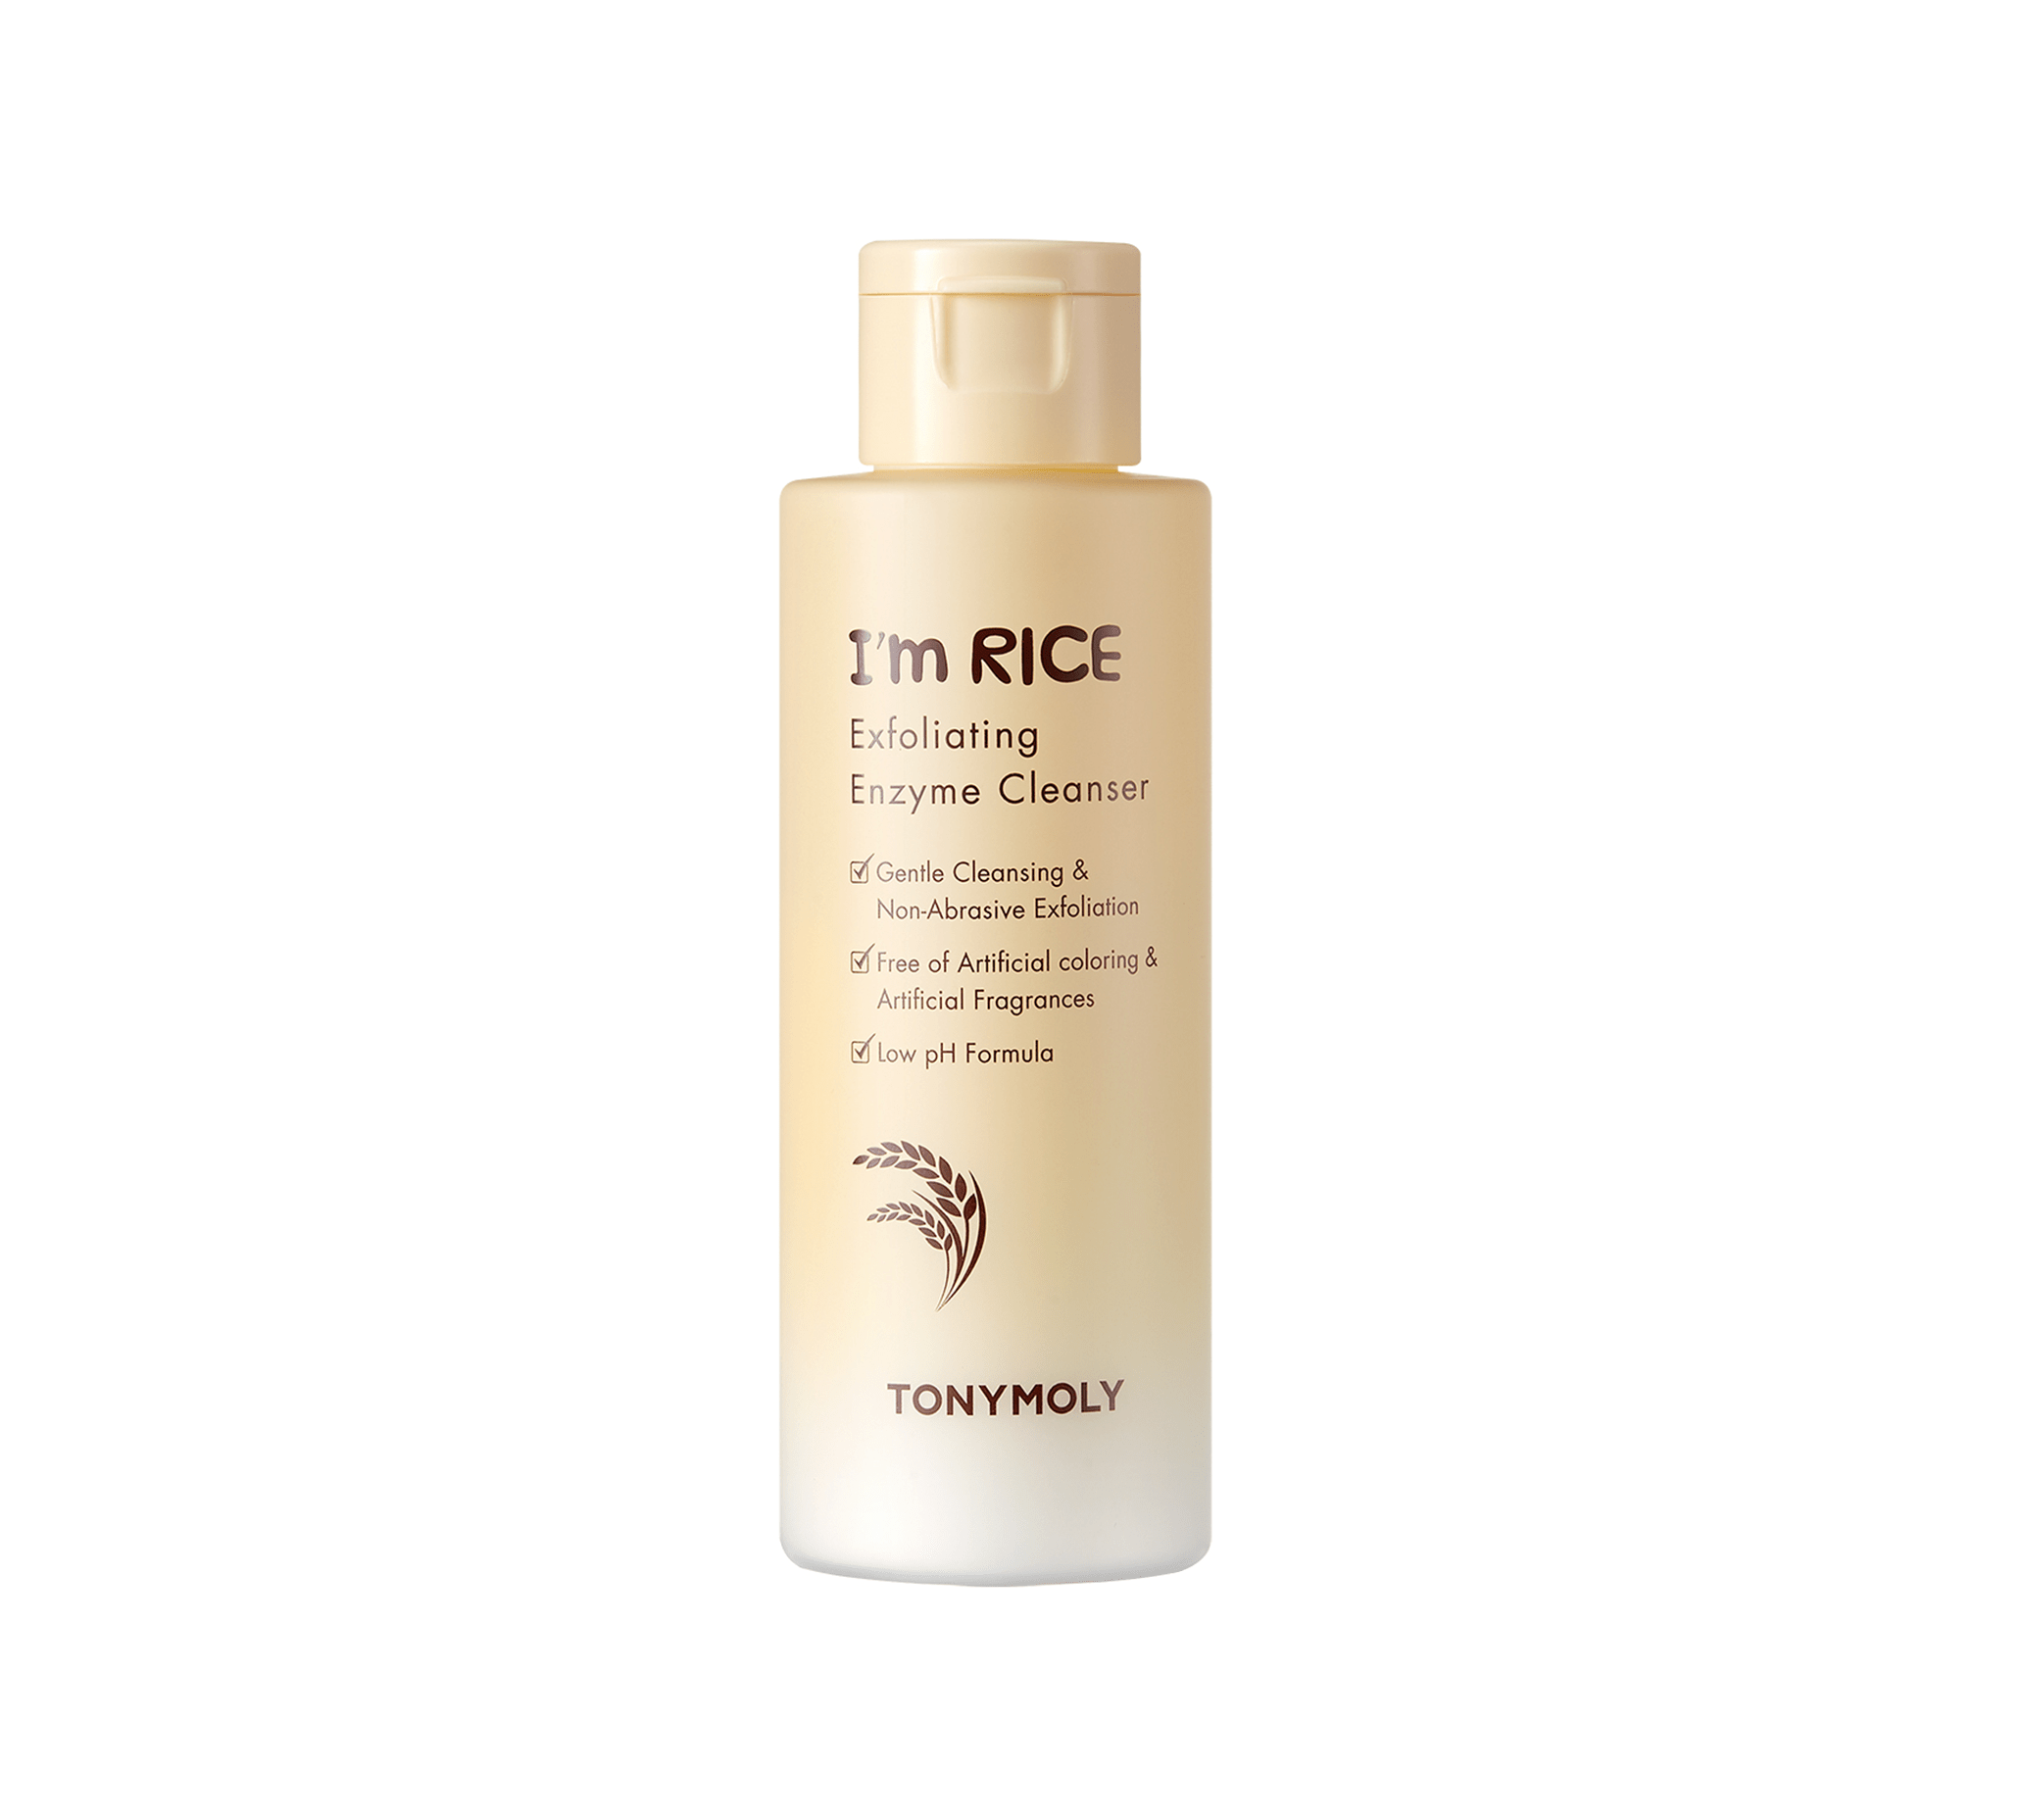 TONYMOLY I'm Rice Exfoliating Enzyme Cleanser Kawaii Gifts 8806194047201